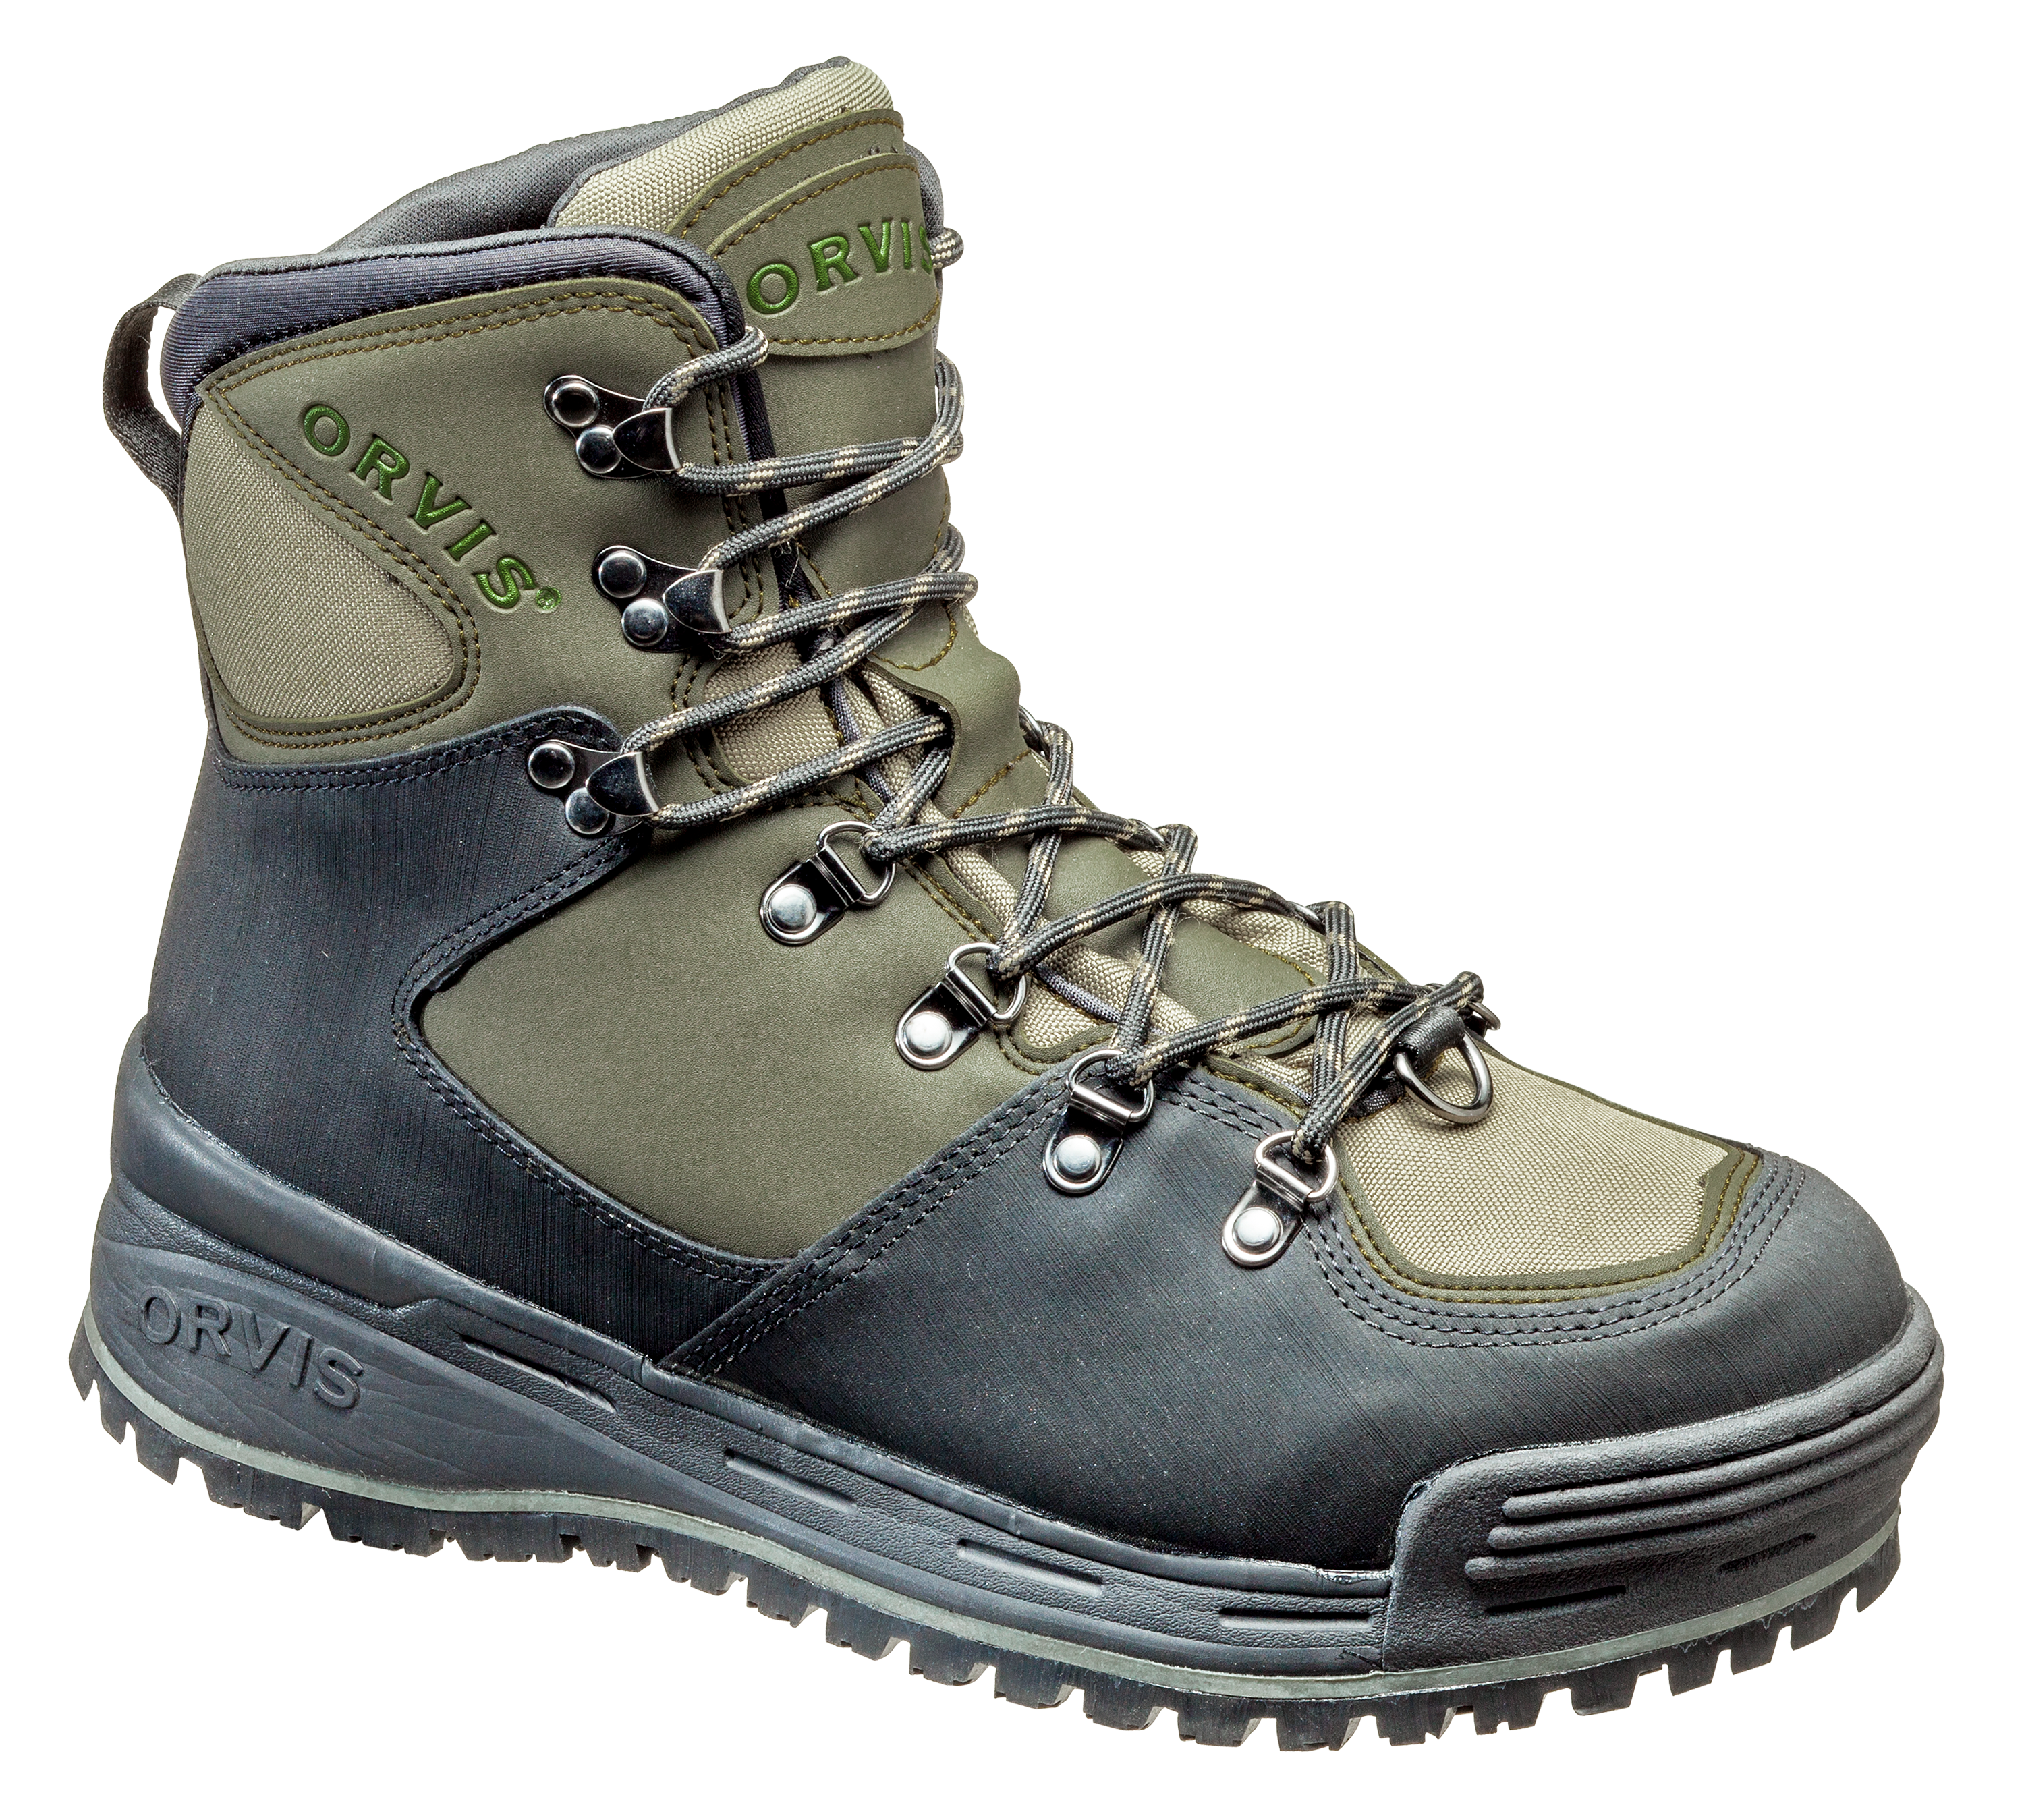 Orvis Men's ClearWater Wading Boot - Rubber Sole